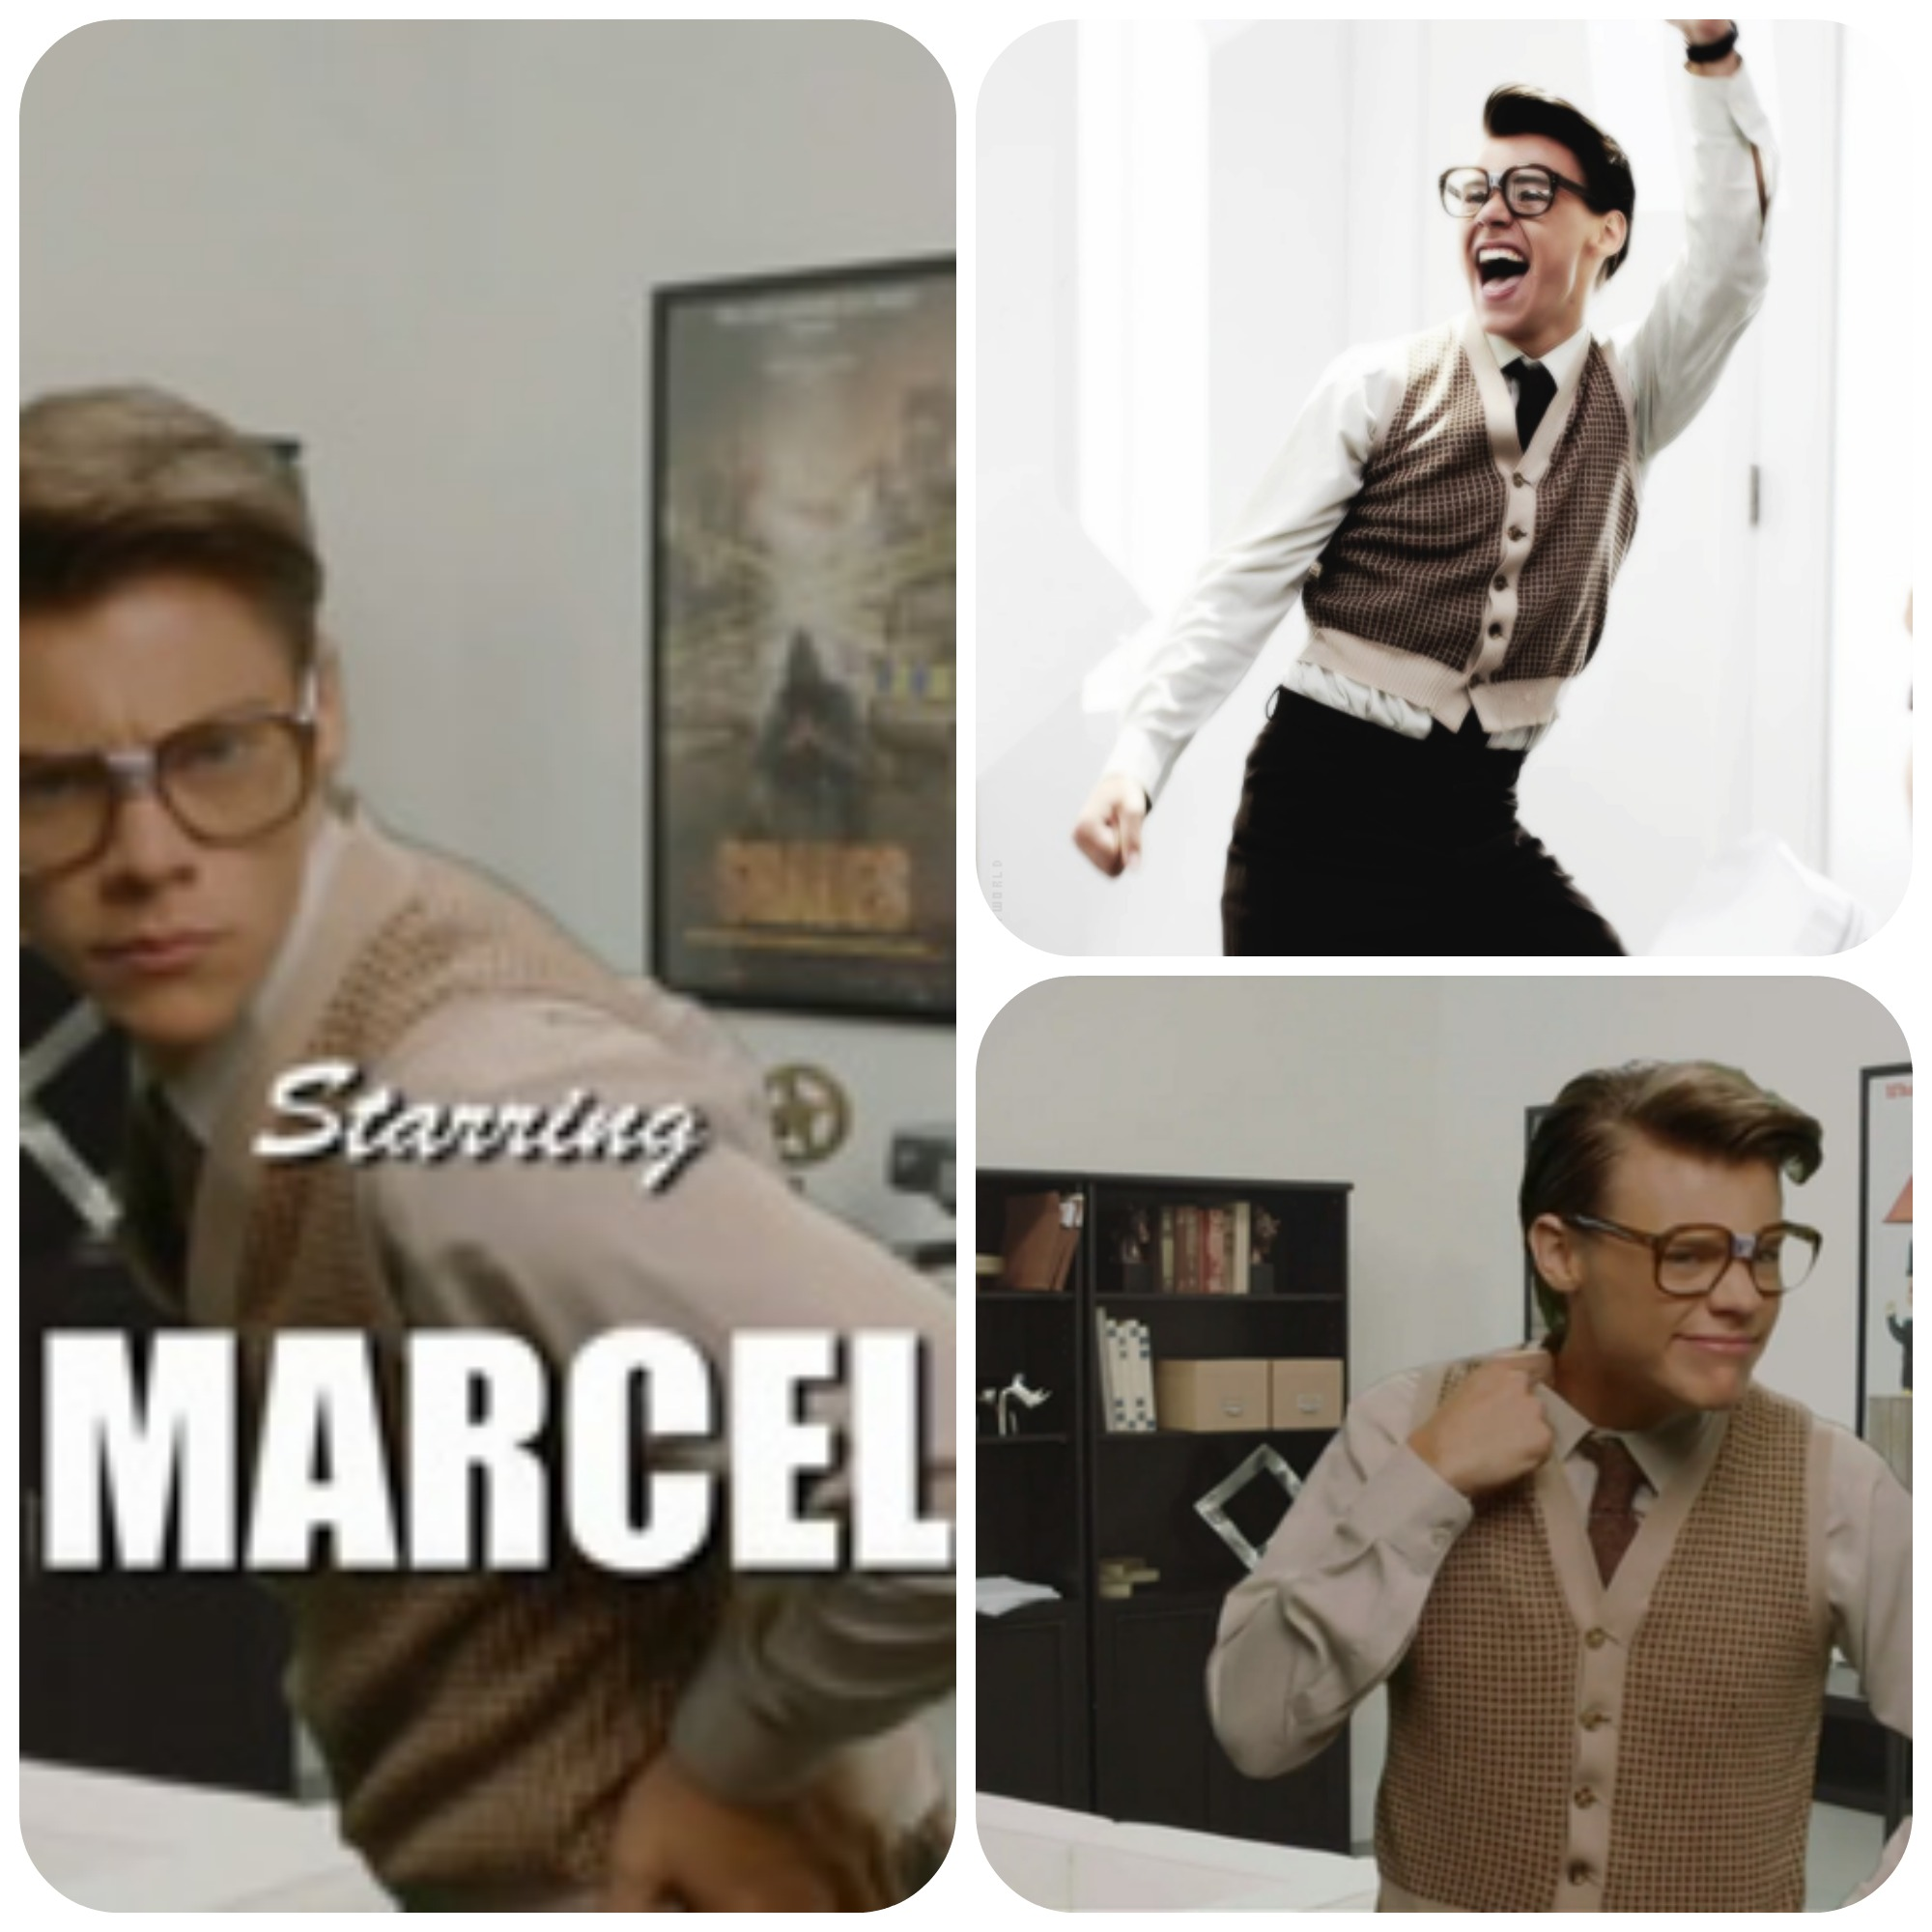 Hazza in best song ever :) 35062129. ワ ン-ダ イ レ ク シ ョ ン, images, image, wall...